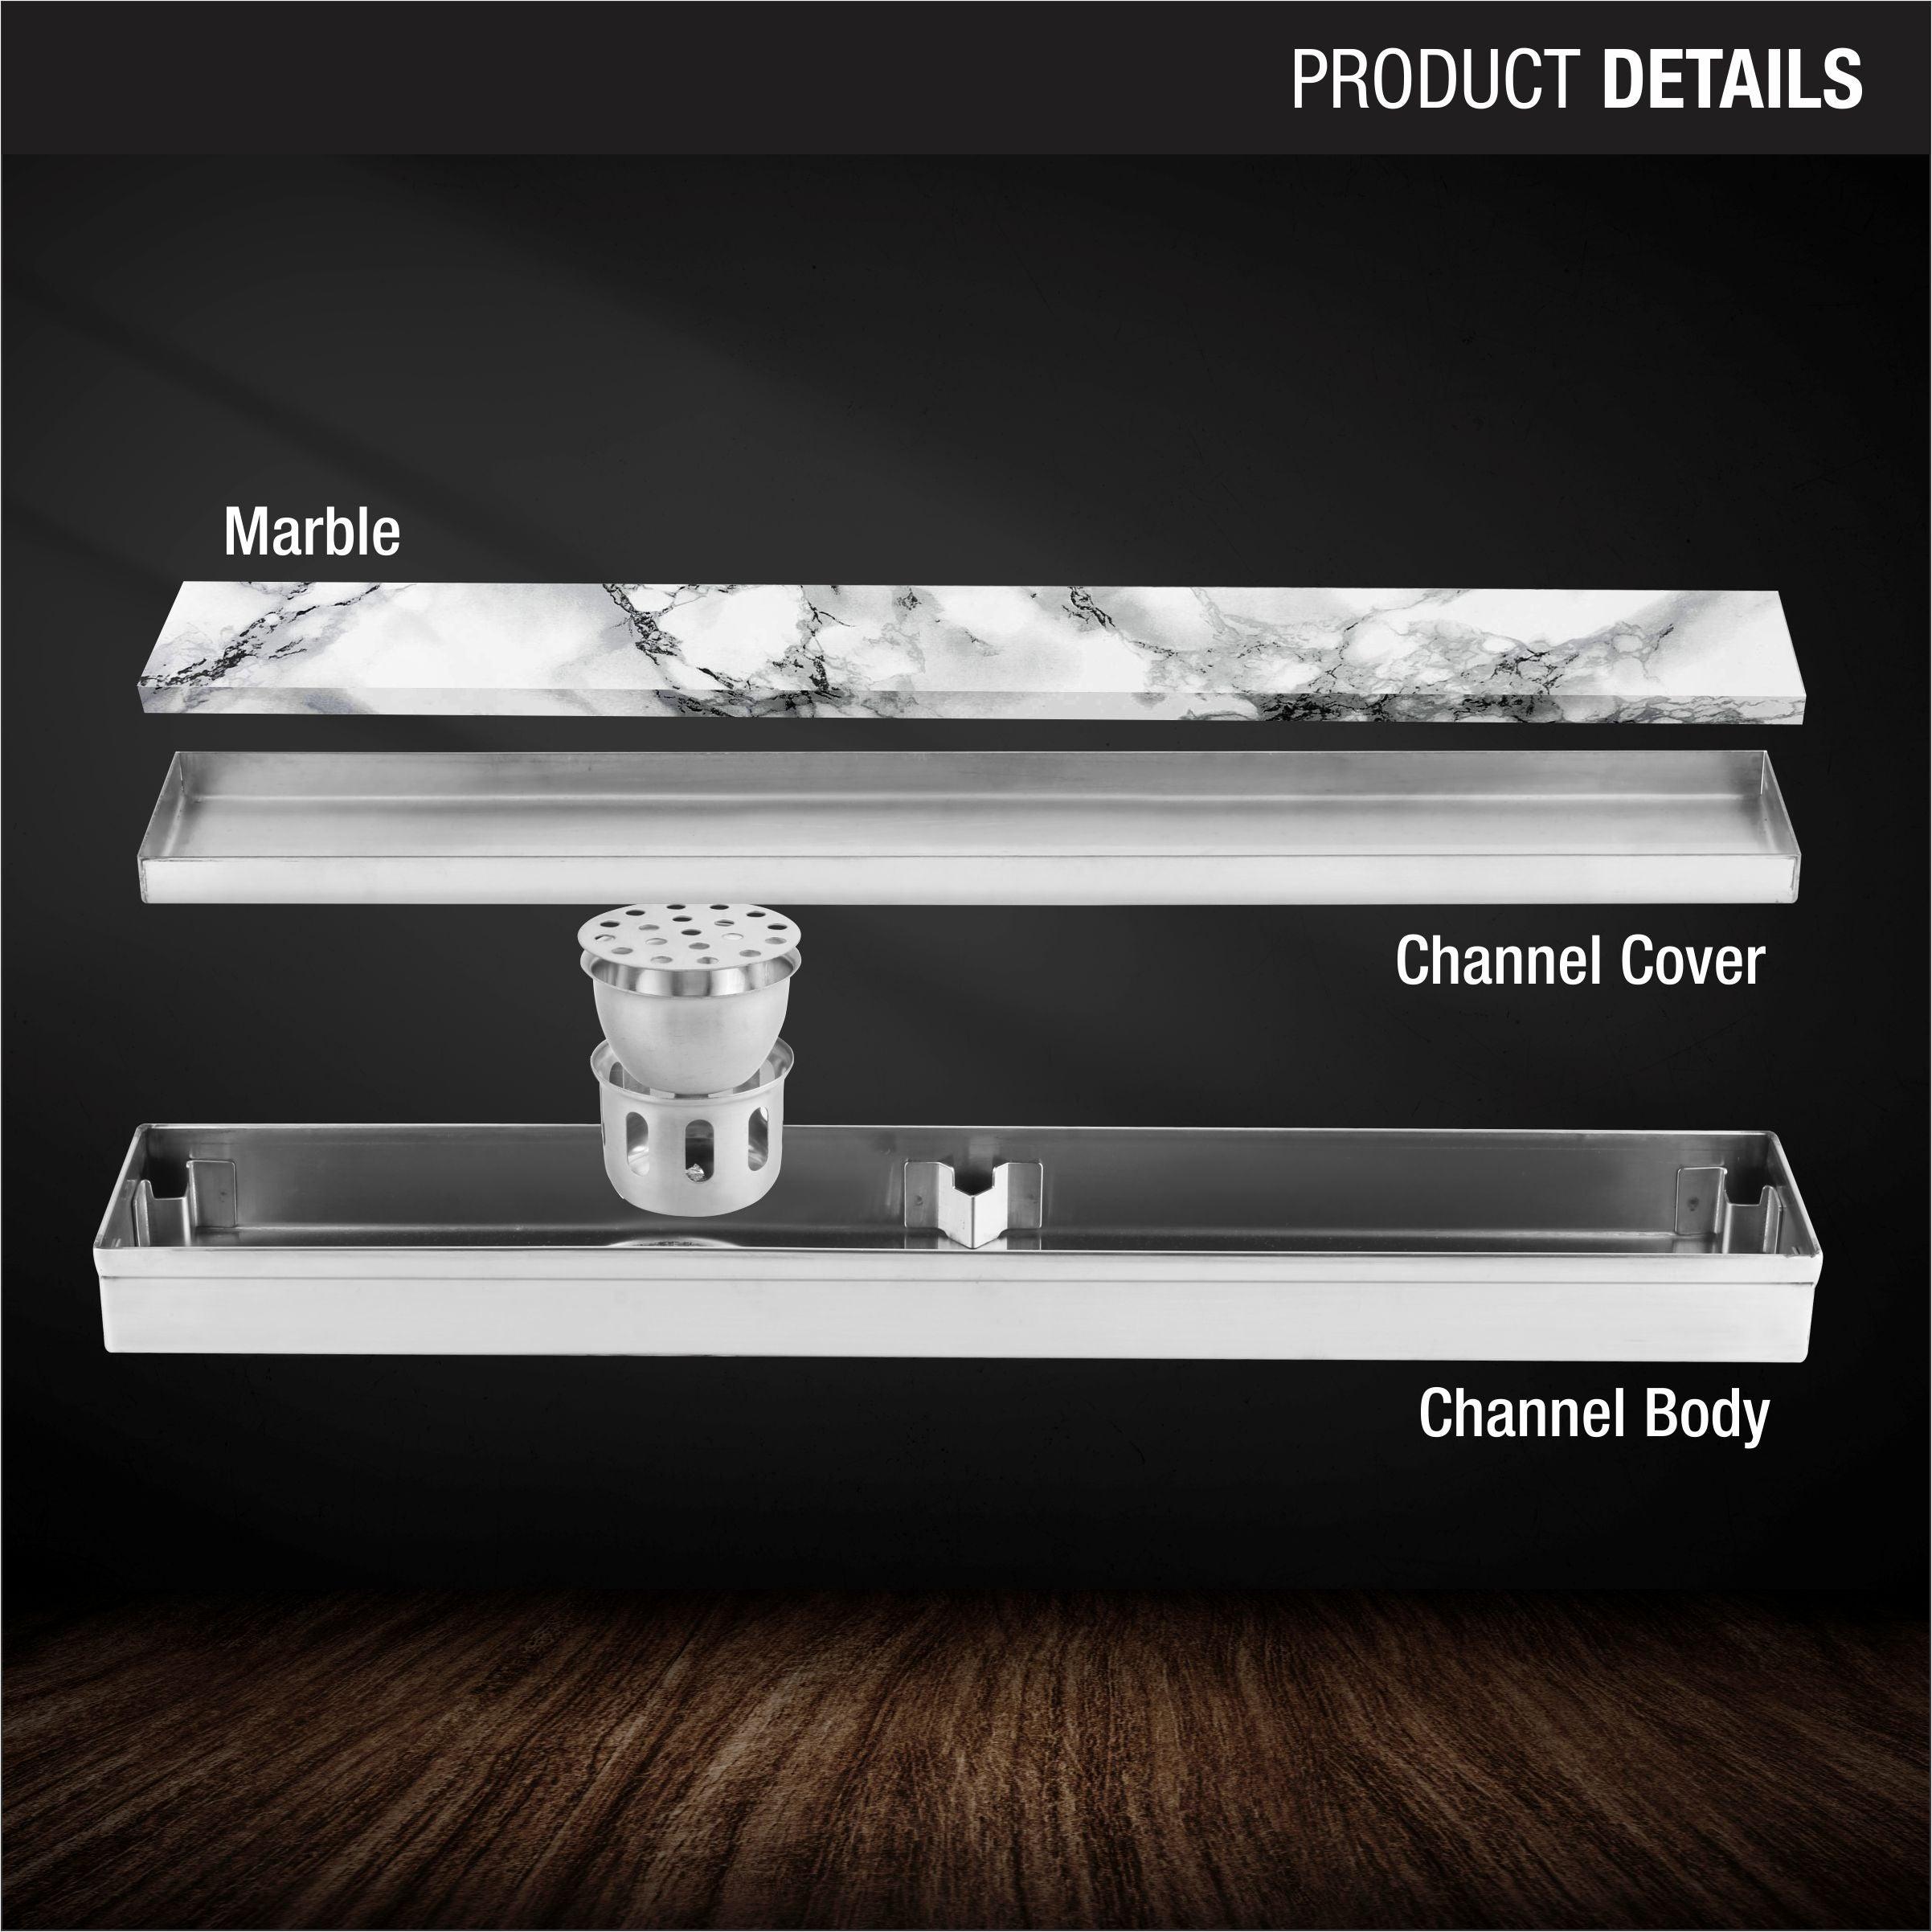 Marble Insert Shower Drain Channel (32 x 3 Inches) product details